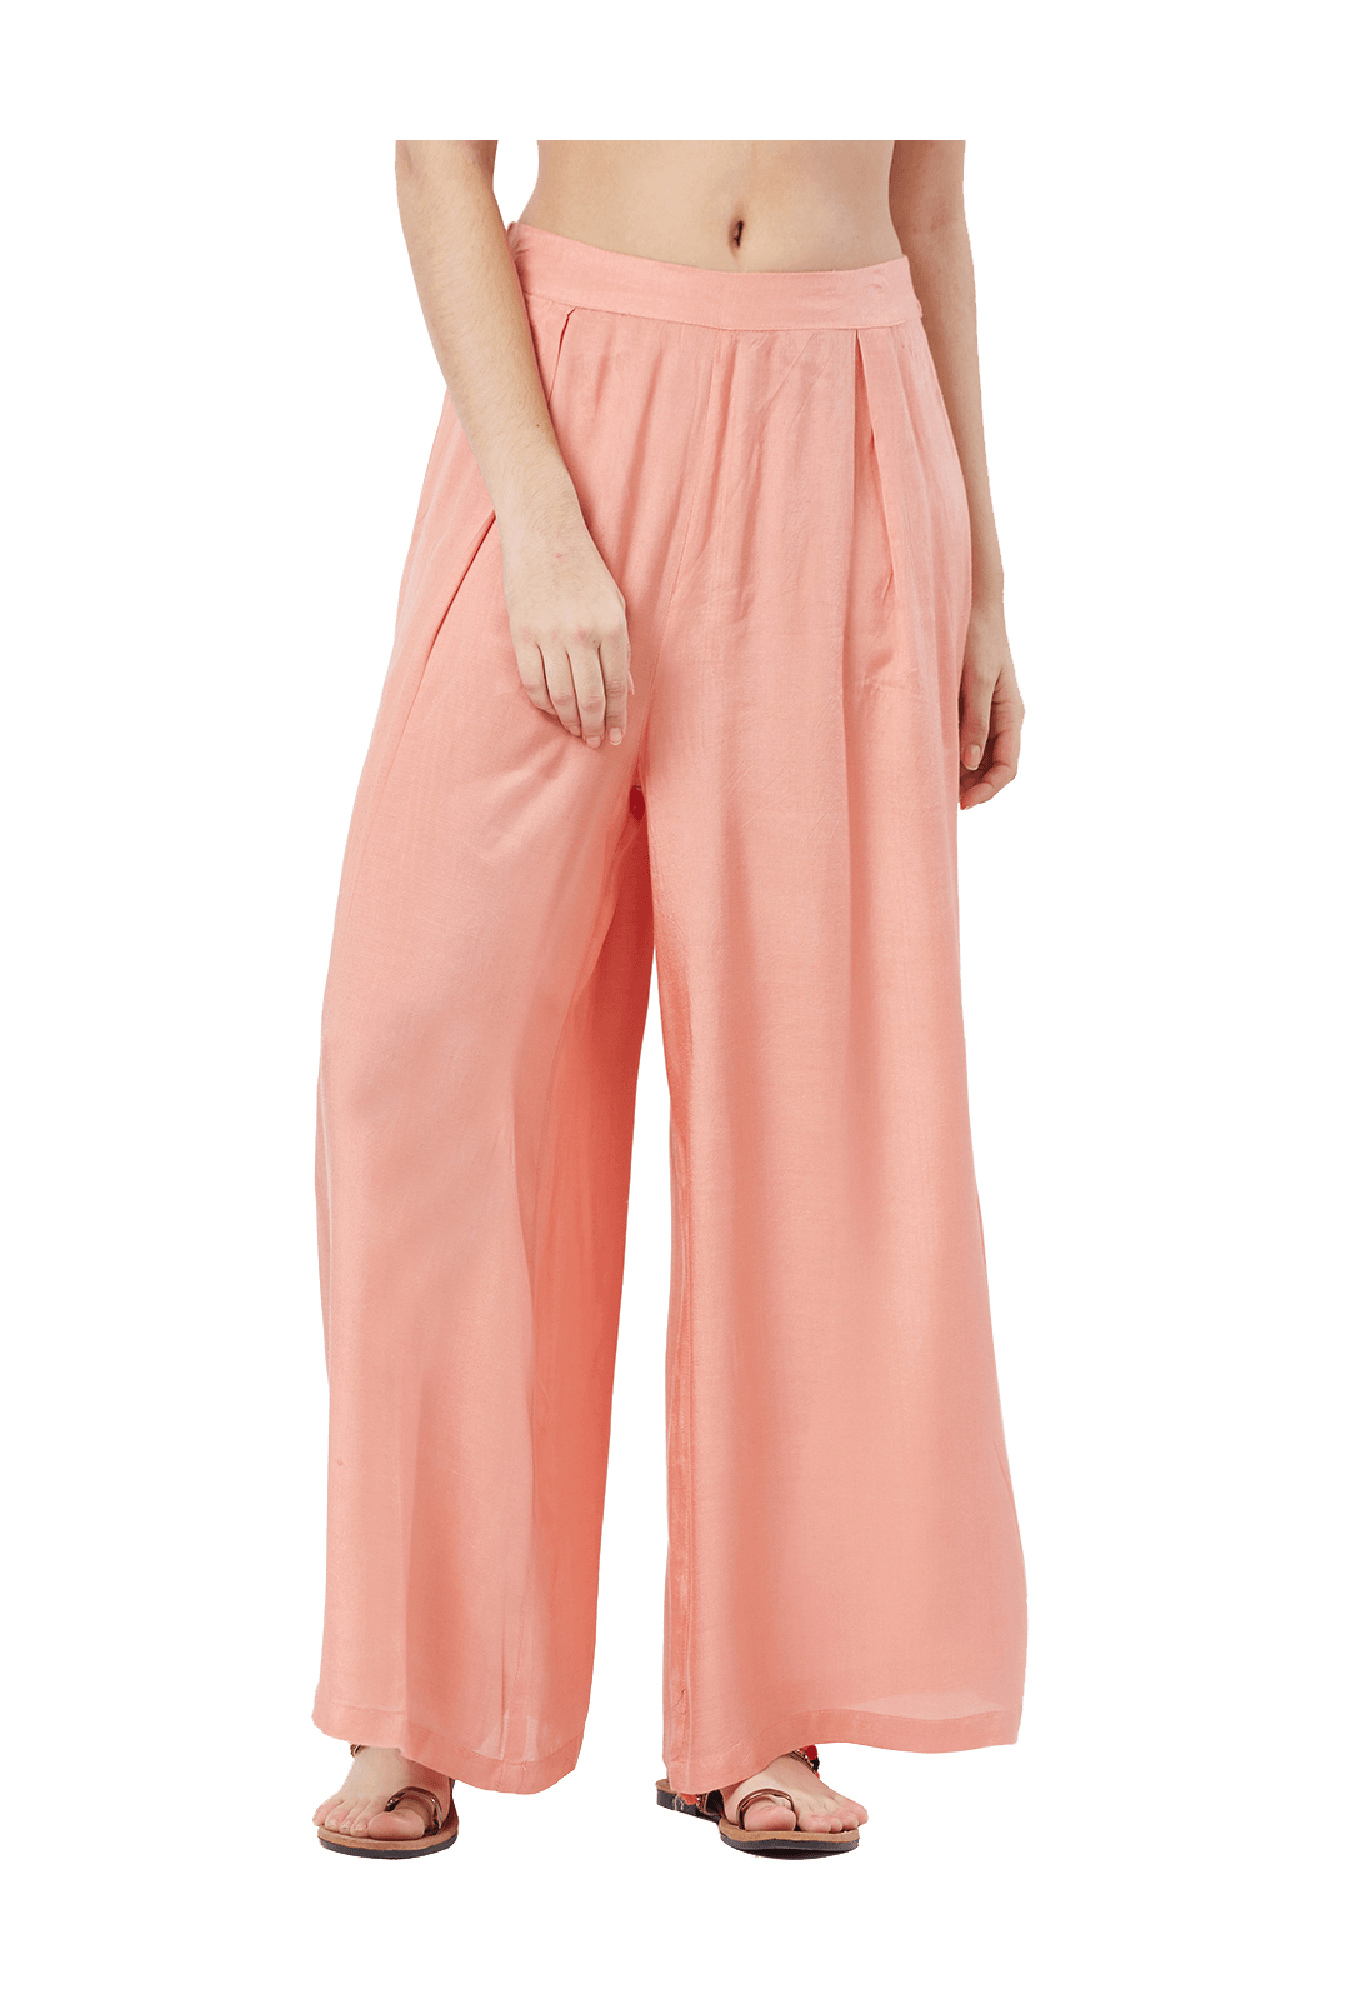 Hip-Hop style. Woman. An interesting ultra-modern fashionable style of an  oversize peach color shirt. Free form. Palazzo trousers